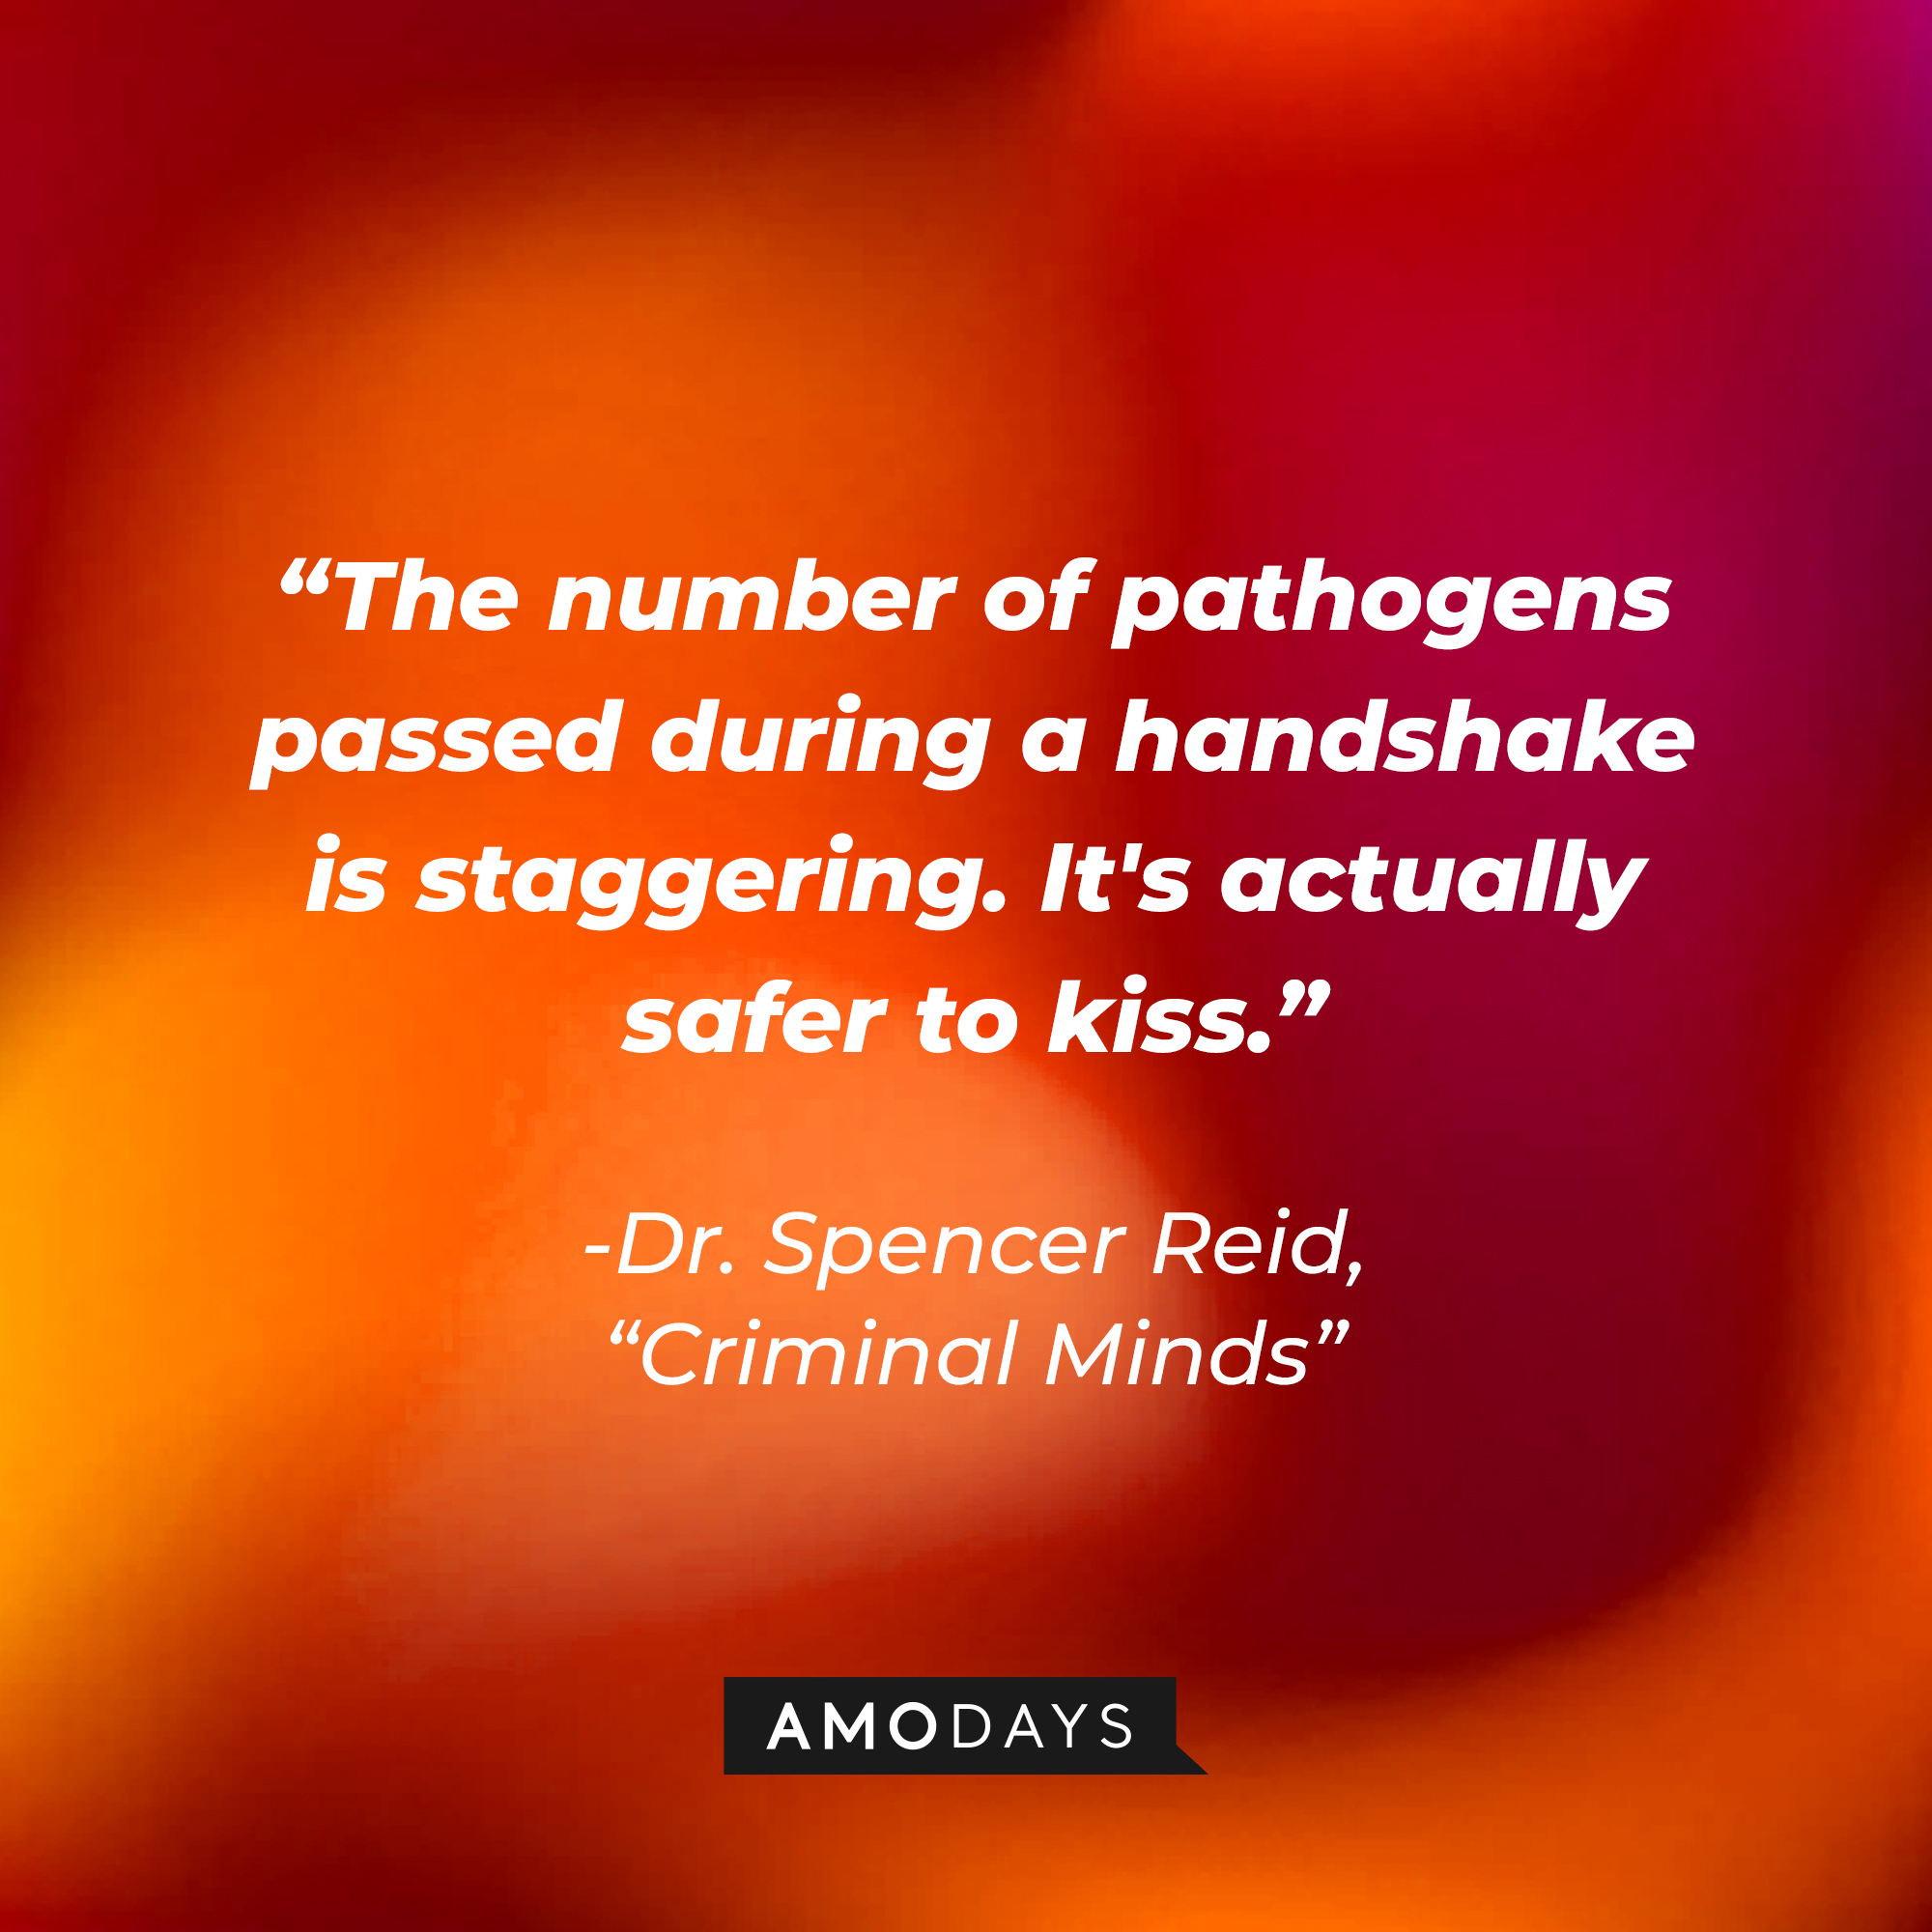 Dr. Spencer Reid's quote: “The number of pathogens passed during a handshake is staggering. It's actually safer to kiss.” | Source: Amodays